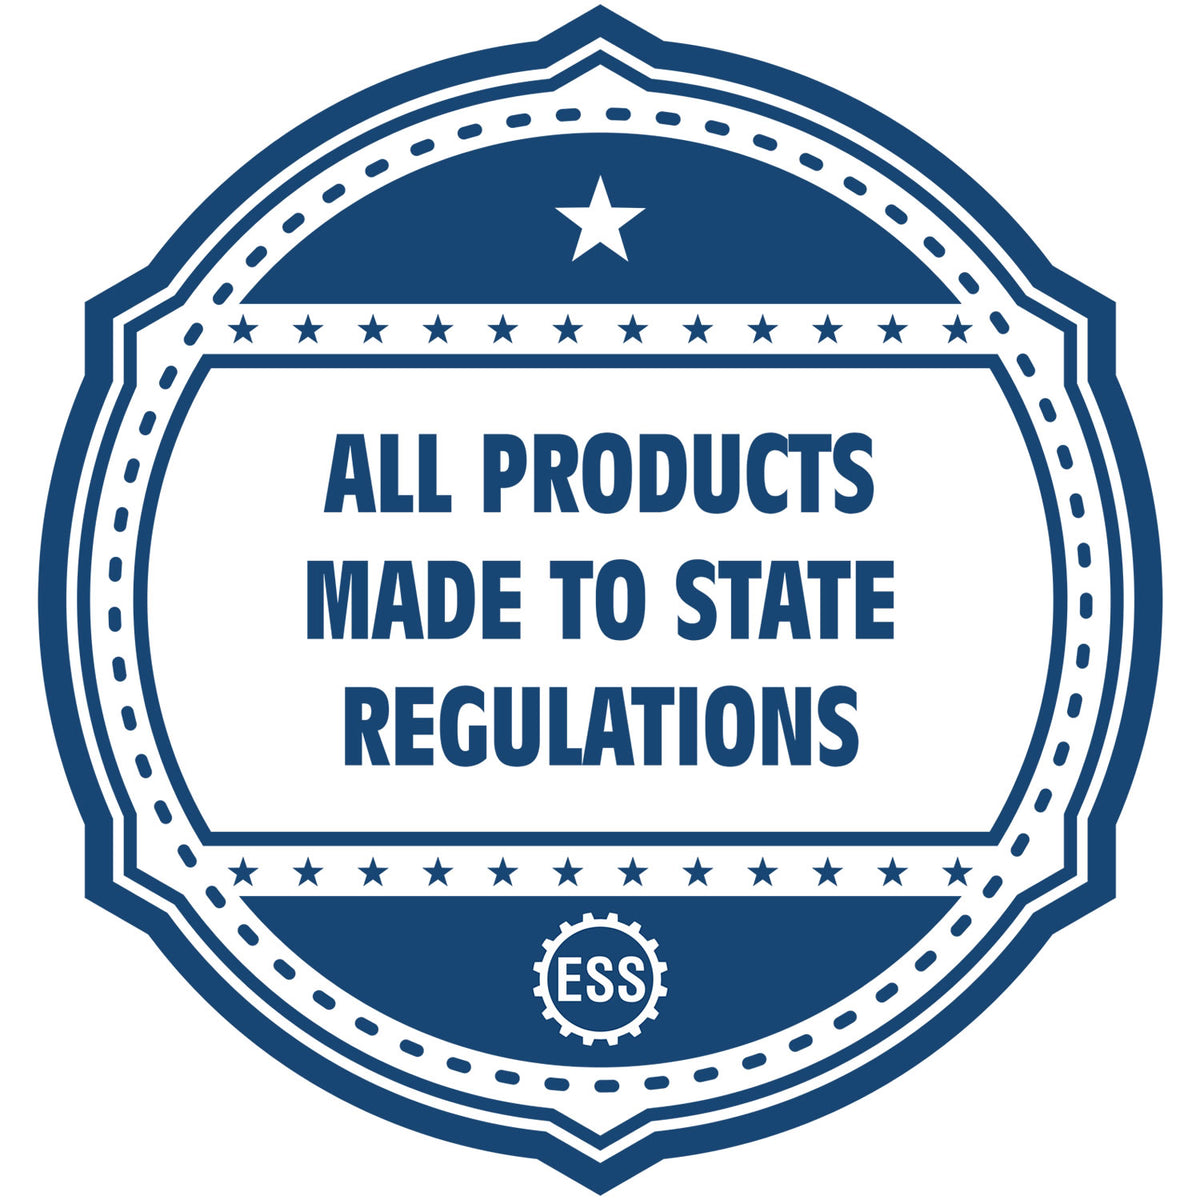 An icon or badge element for the MaxLight Premium Pre-Inked Minnesota State Seal Notarial Stamp showing that this product is made in compliance with state regulations.